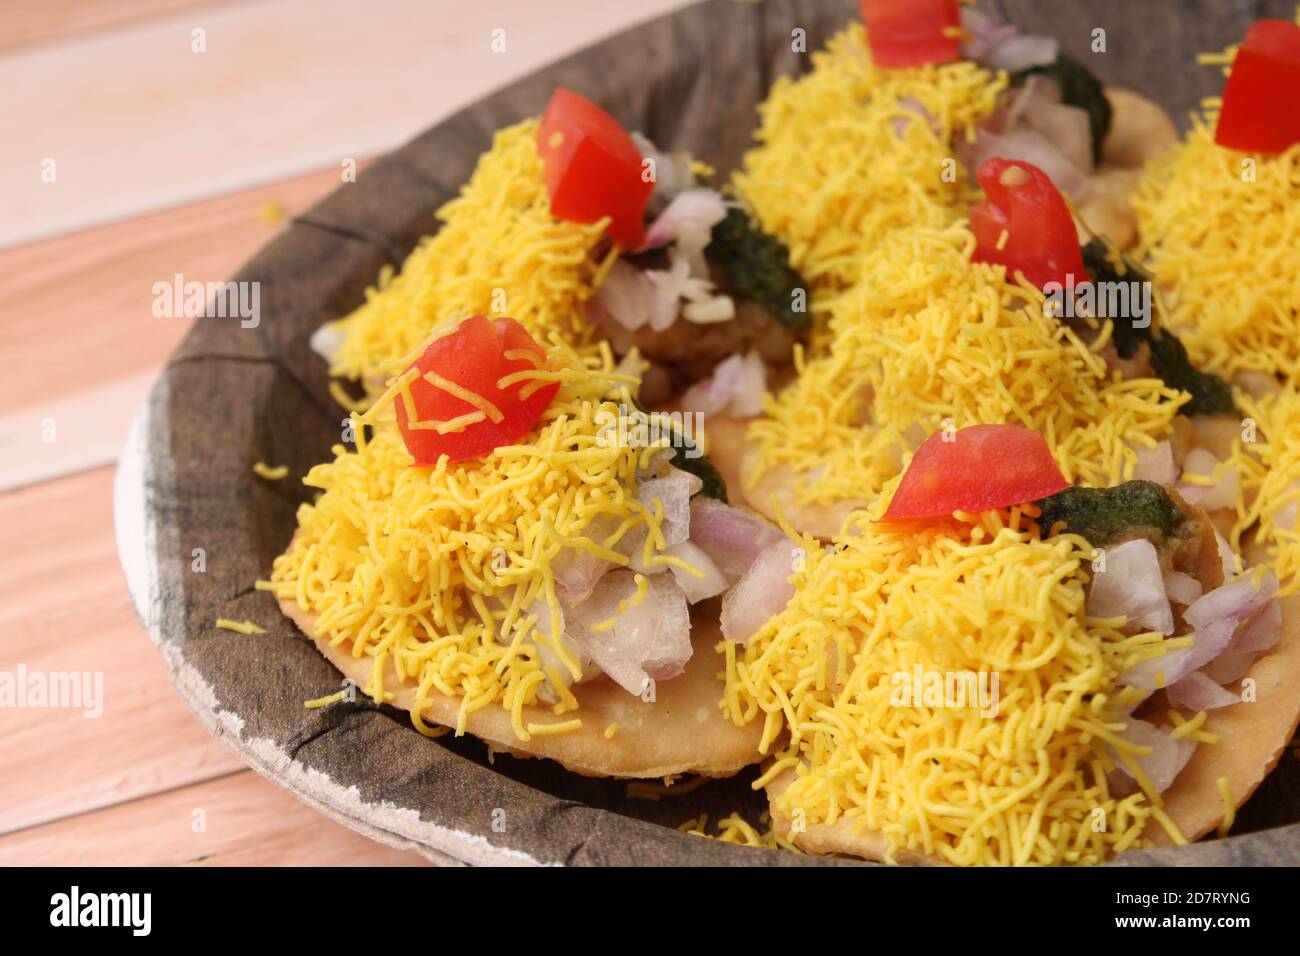 Sev Batata Puri OR Papdi chat - popular indian snacks or street food. Stock Photo